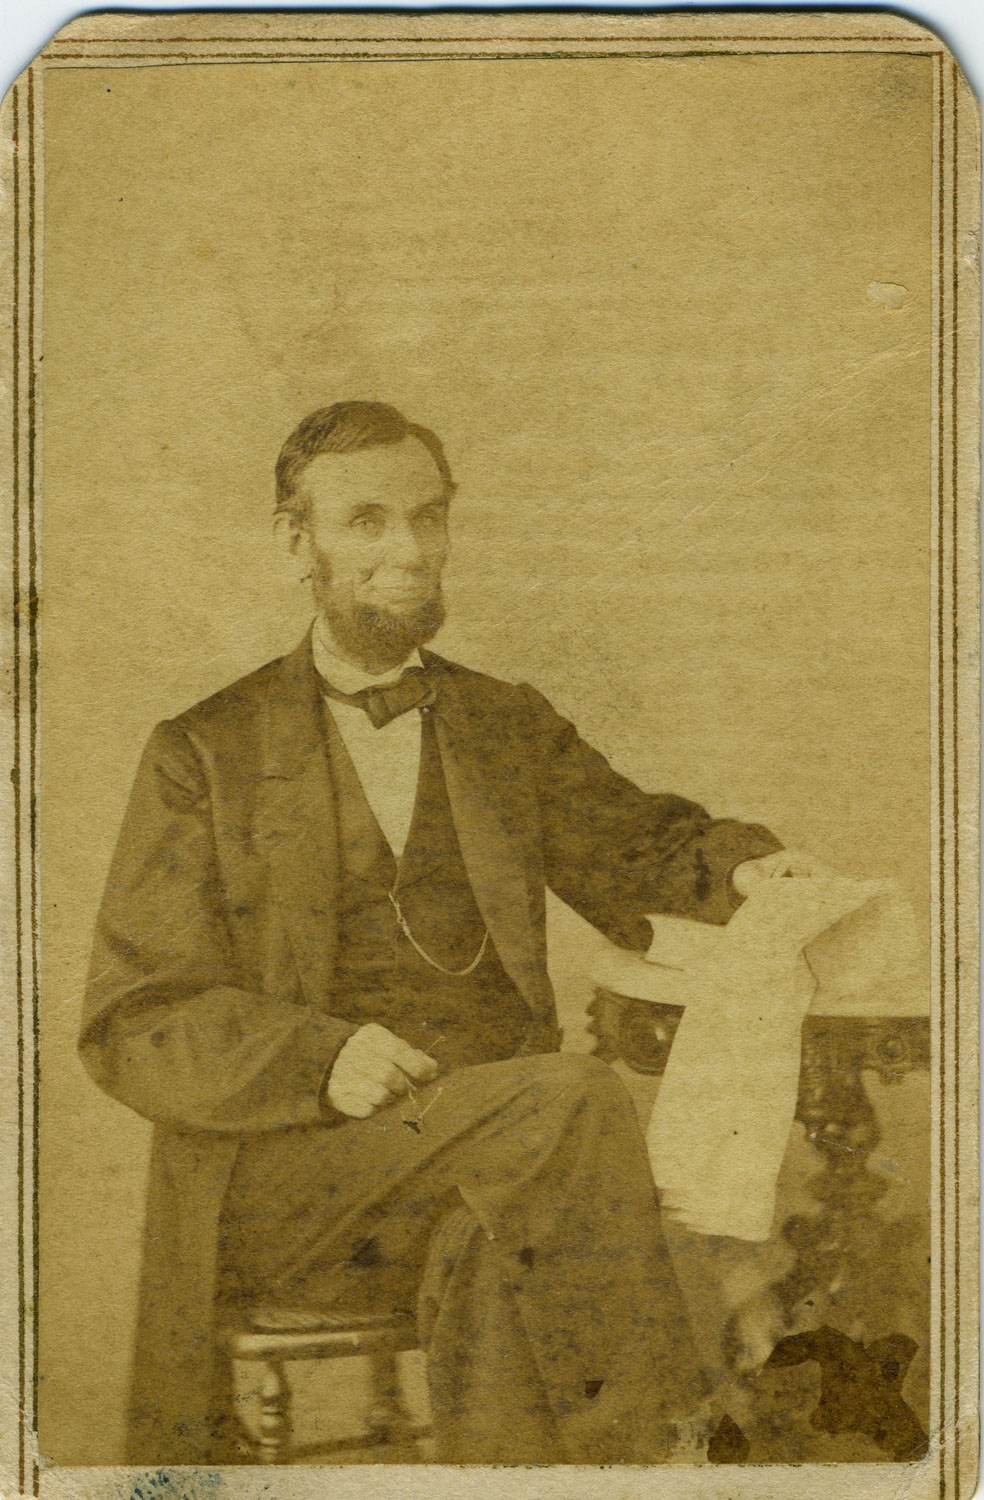 Lincoln Seated with Newspaper